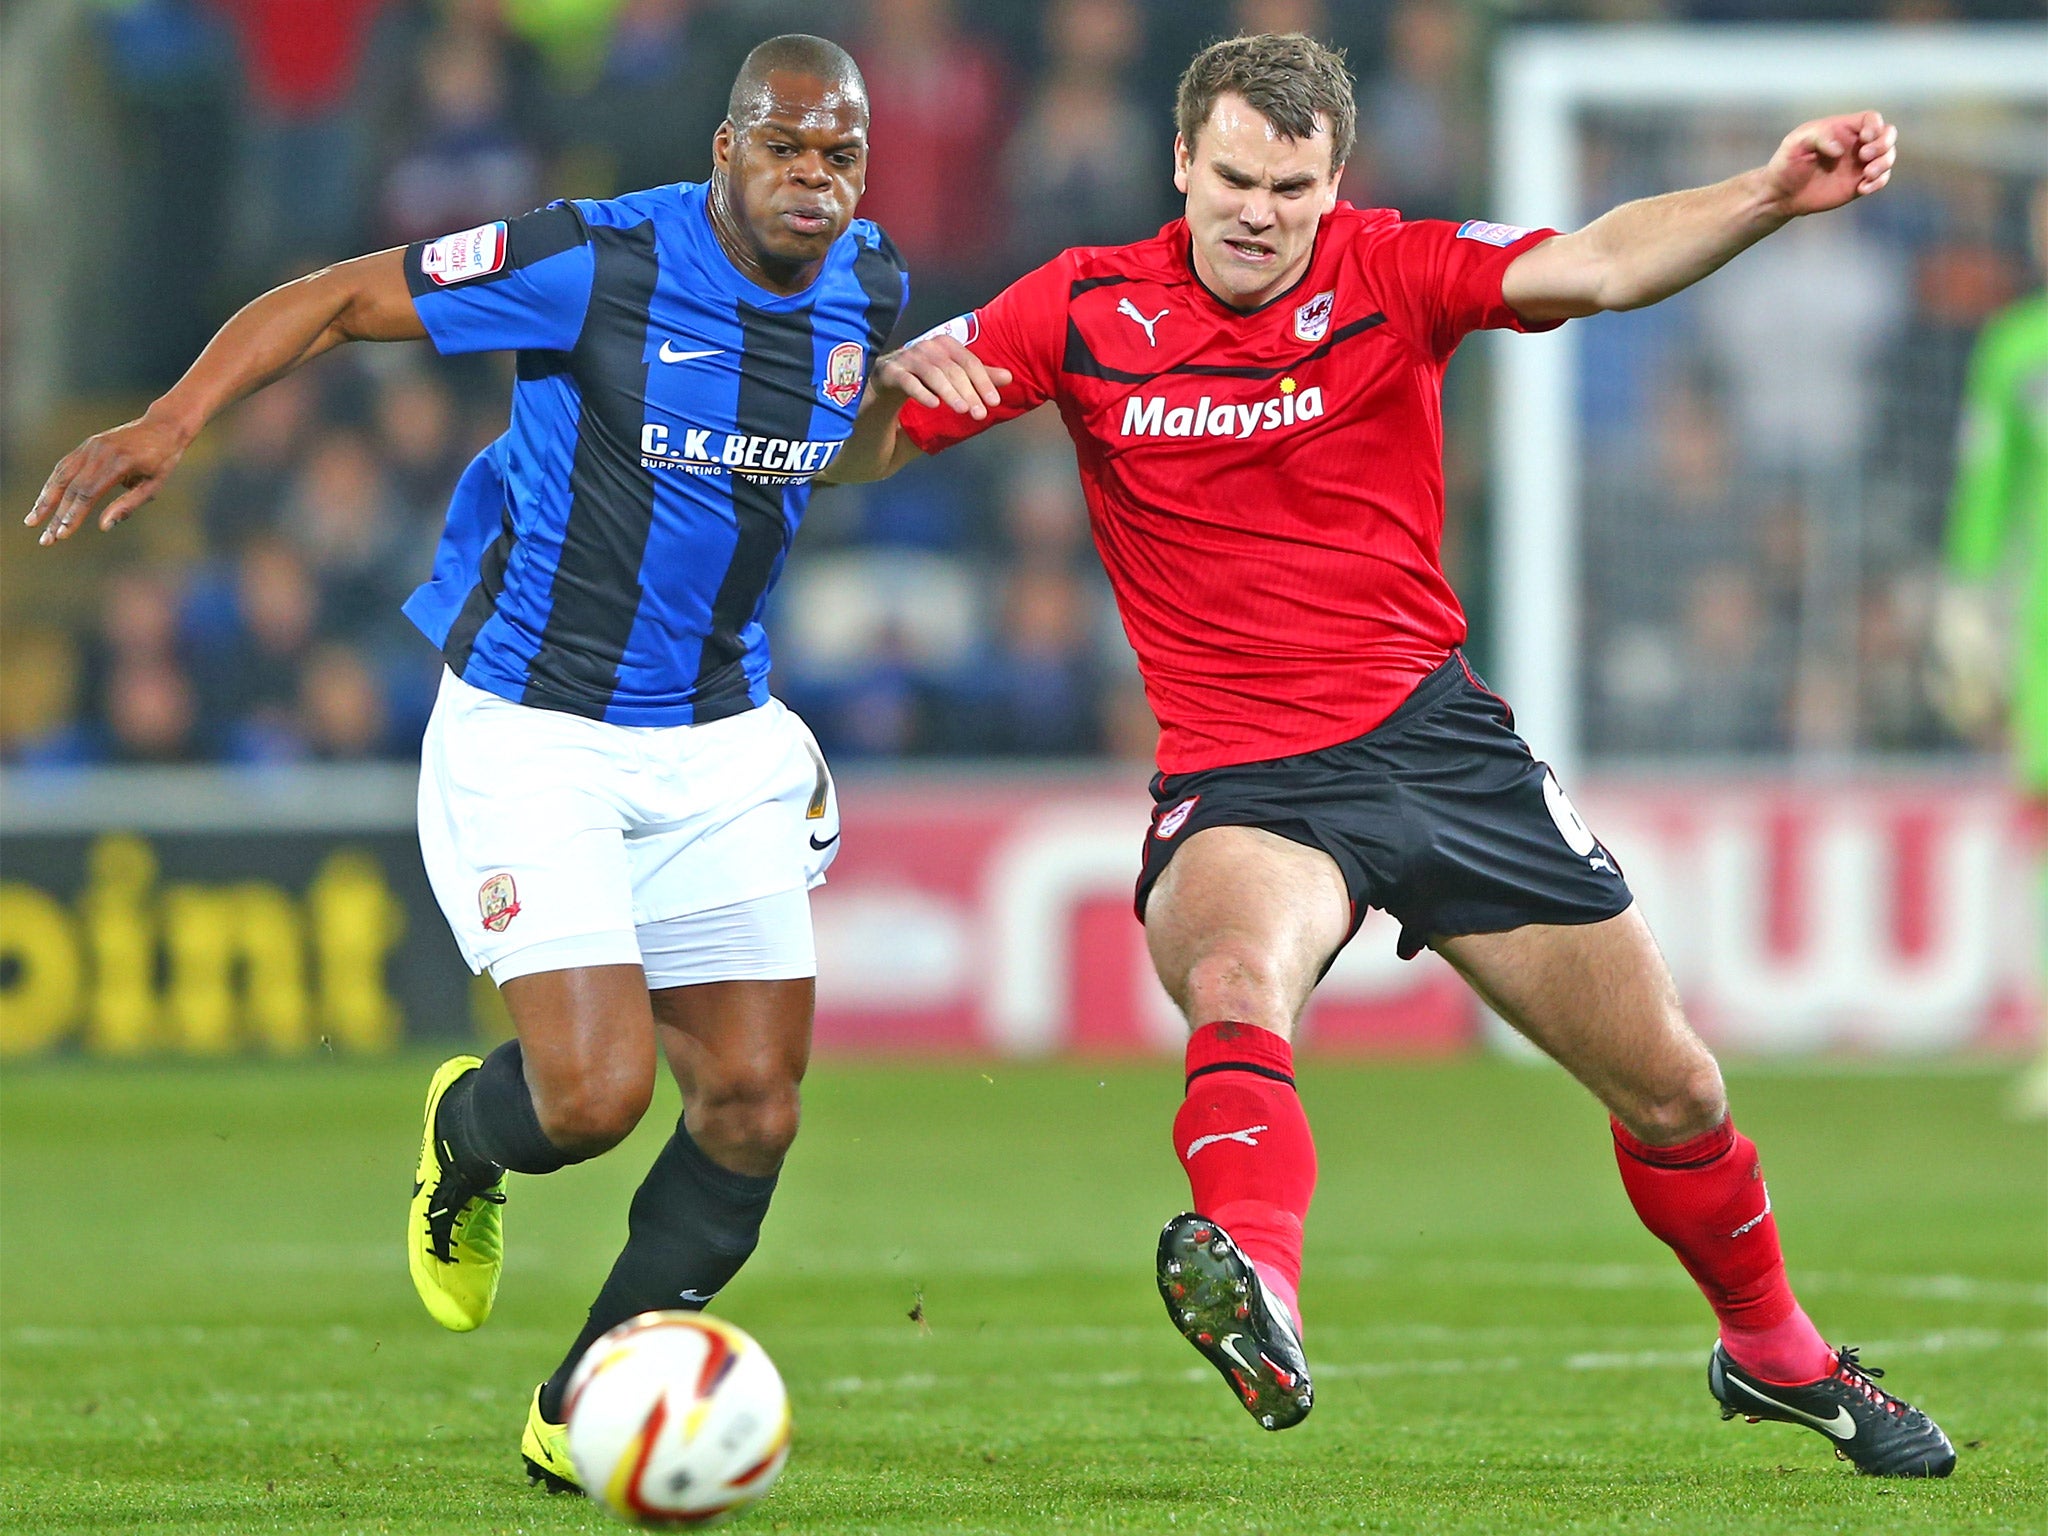 Ben Turner (right), who scored Cardiff’s goal, challenges Marlon Harewood